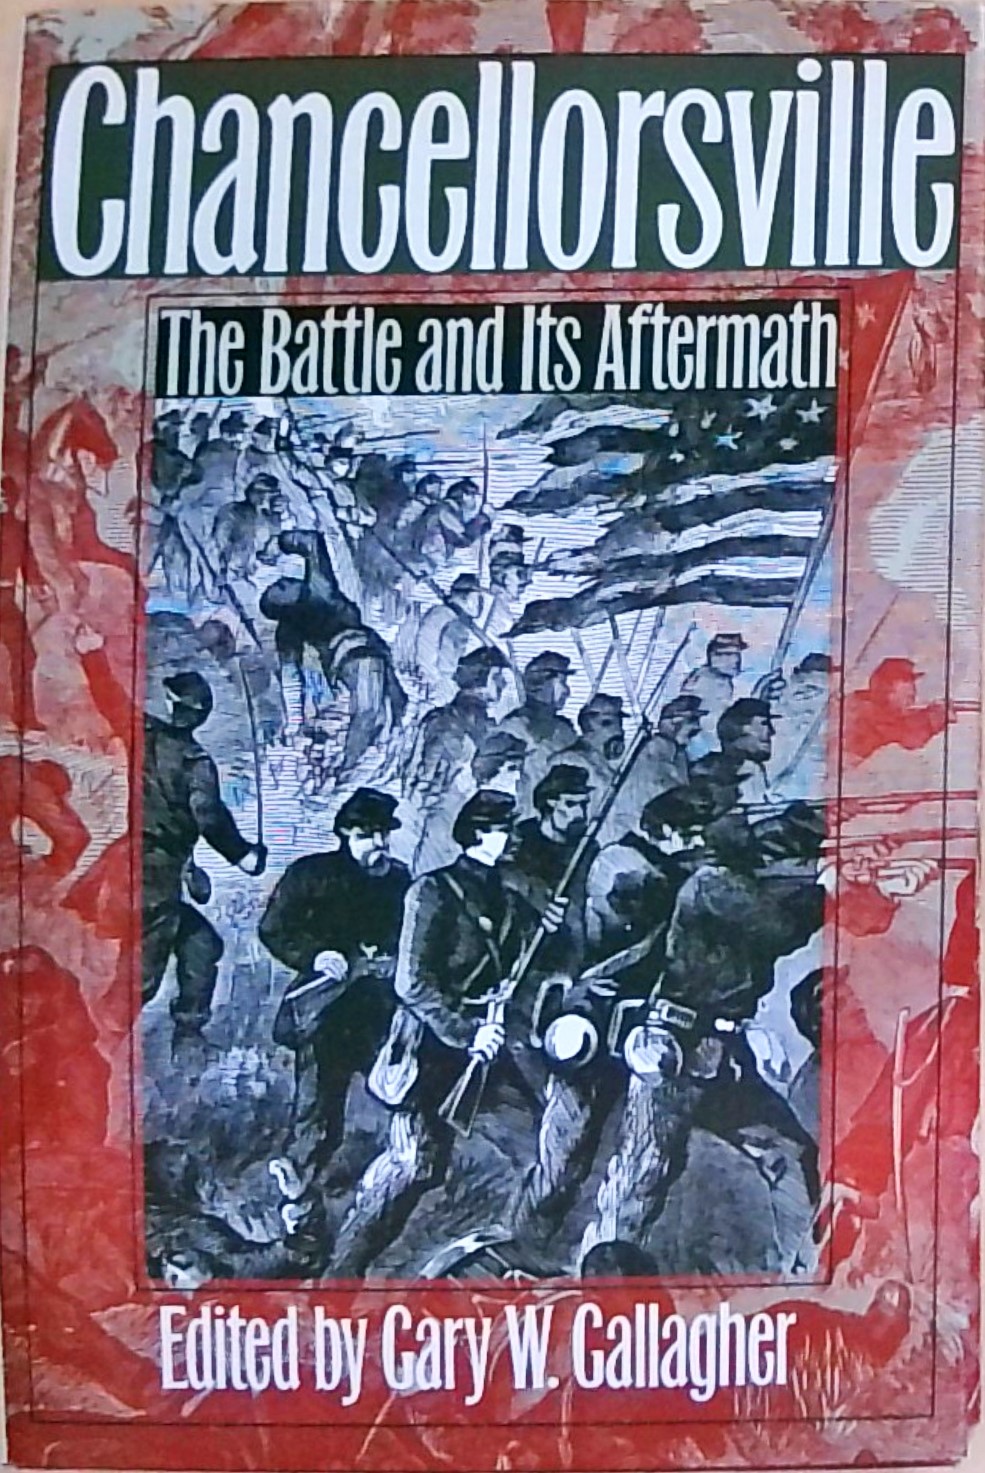 Chancellorsville: The Battle and Its Aftermath (Military Campaigns of the Civil War) - Gallagher, Gary W.